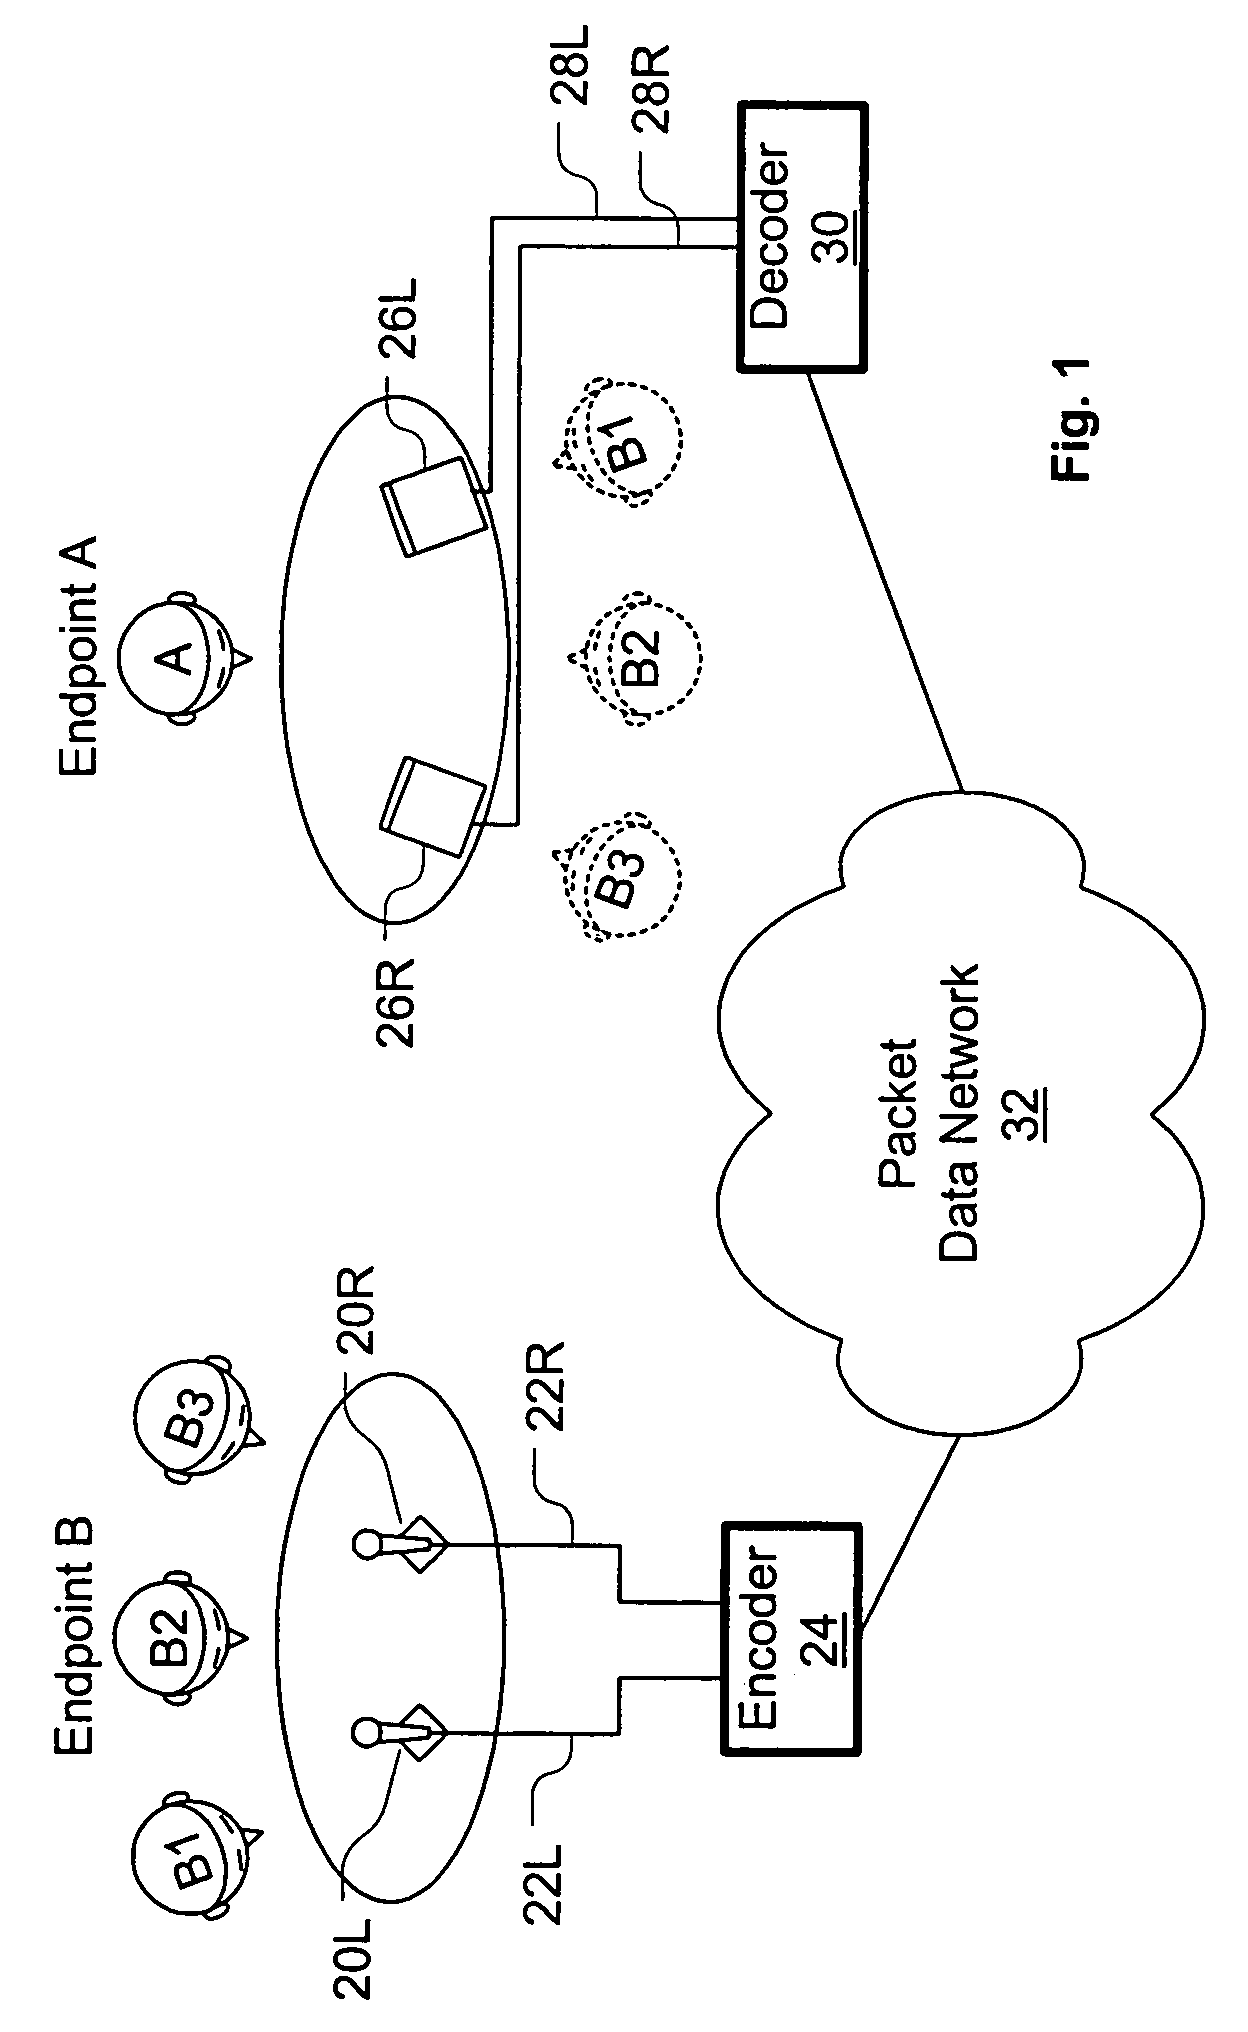 System and method for stereo conferencing over low-bandwidth links